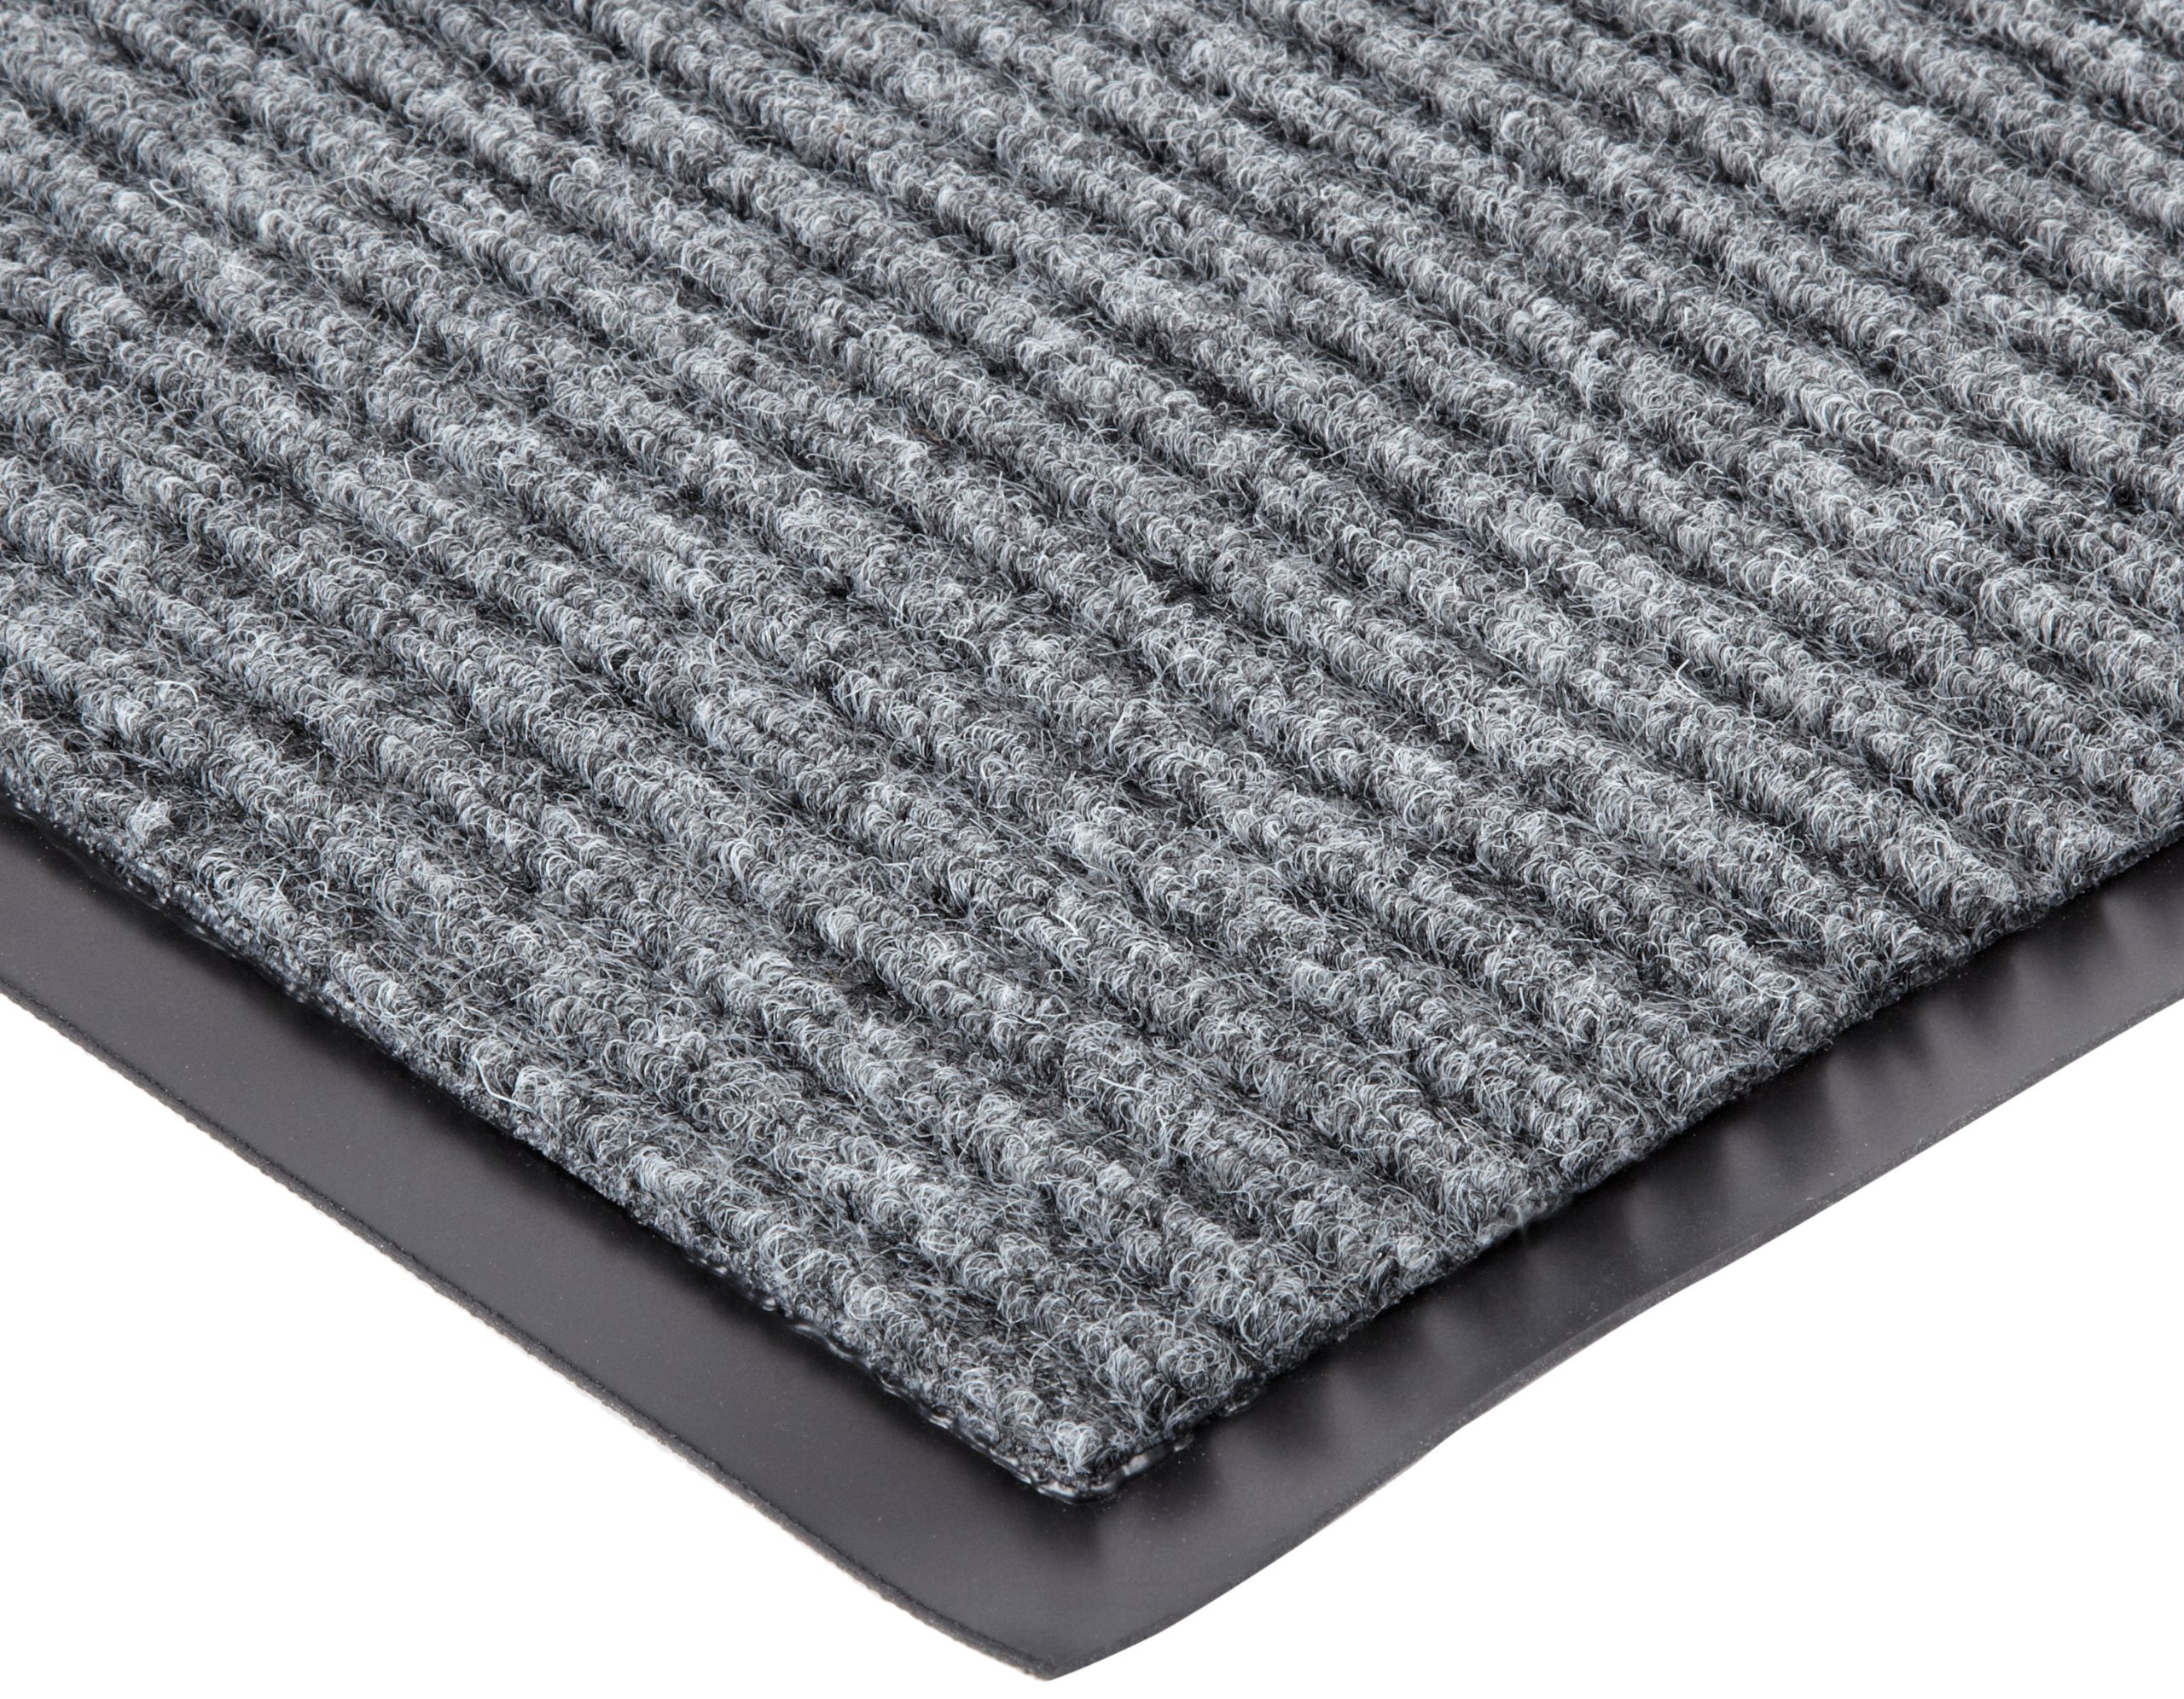 613s0023ch 2 Ft. W X 3 Ft. L Spectra Rib Entrance Mat In Charcoal